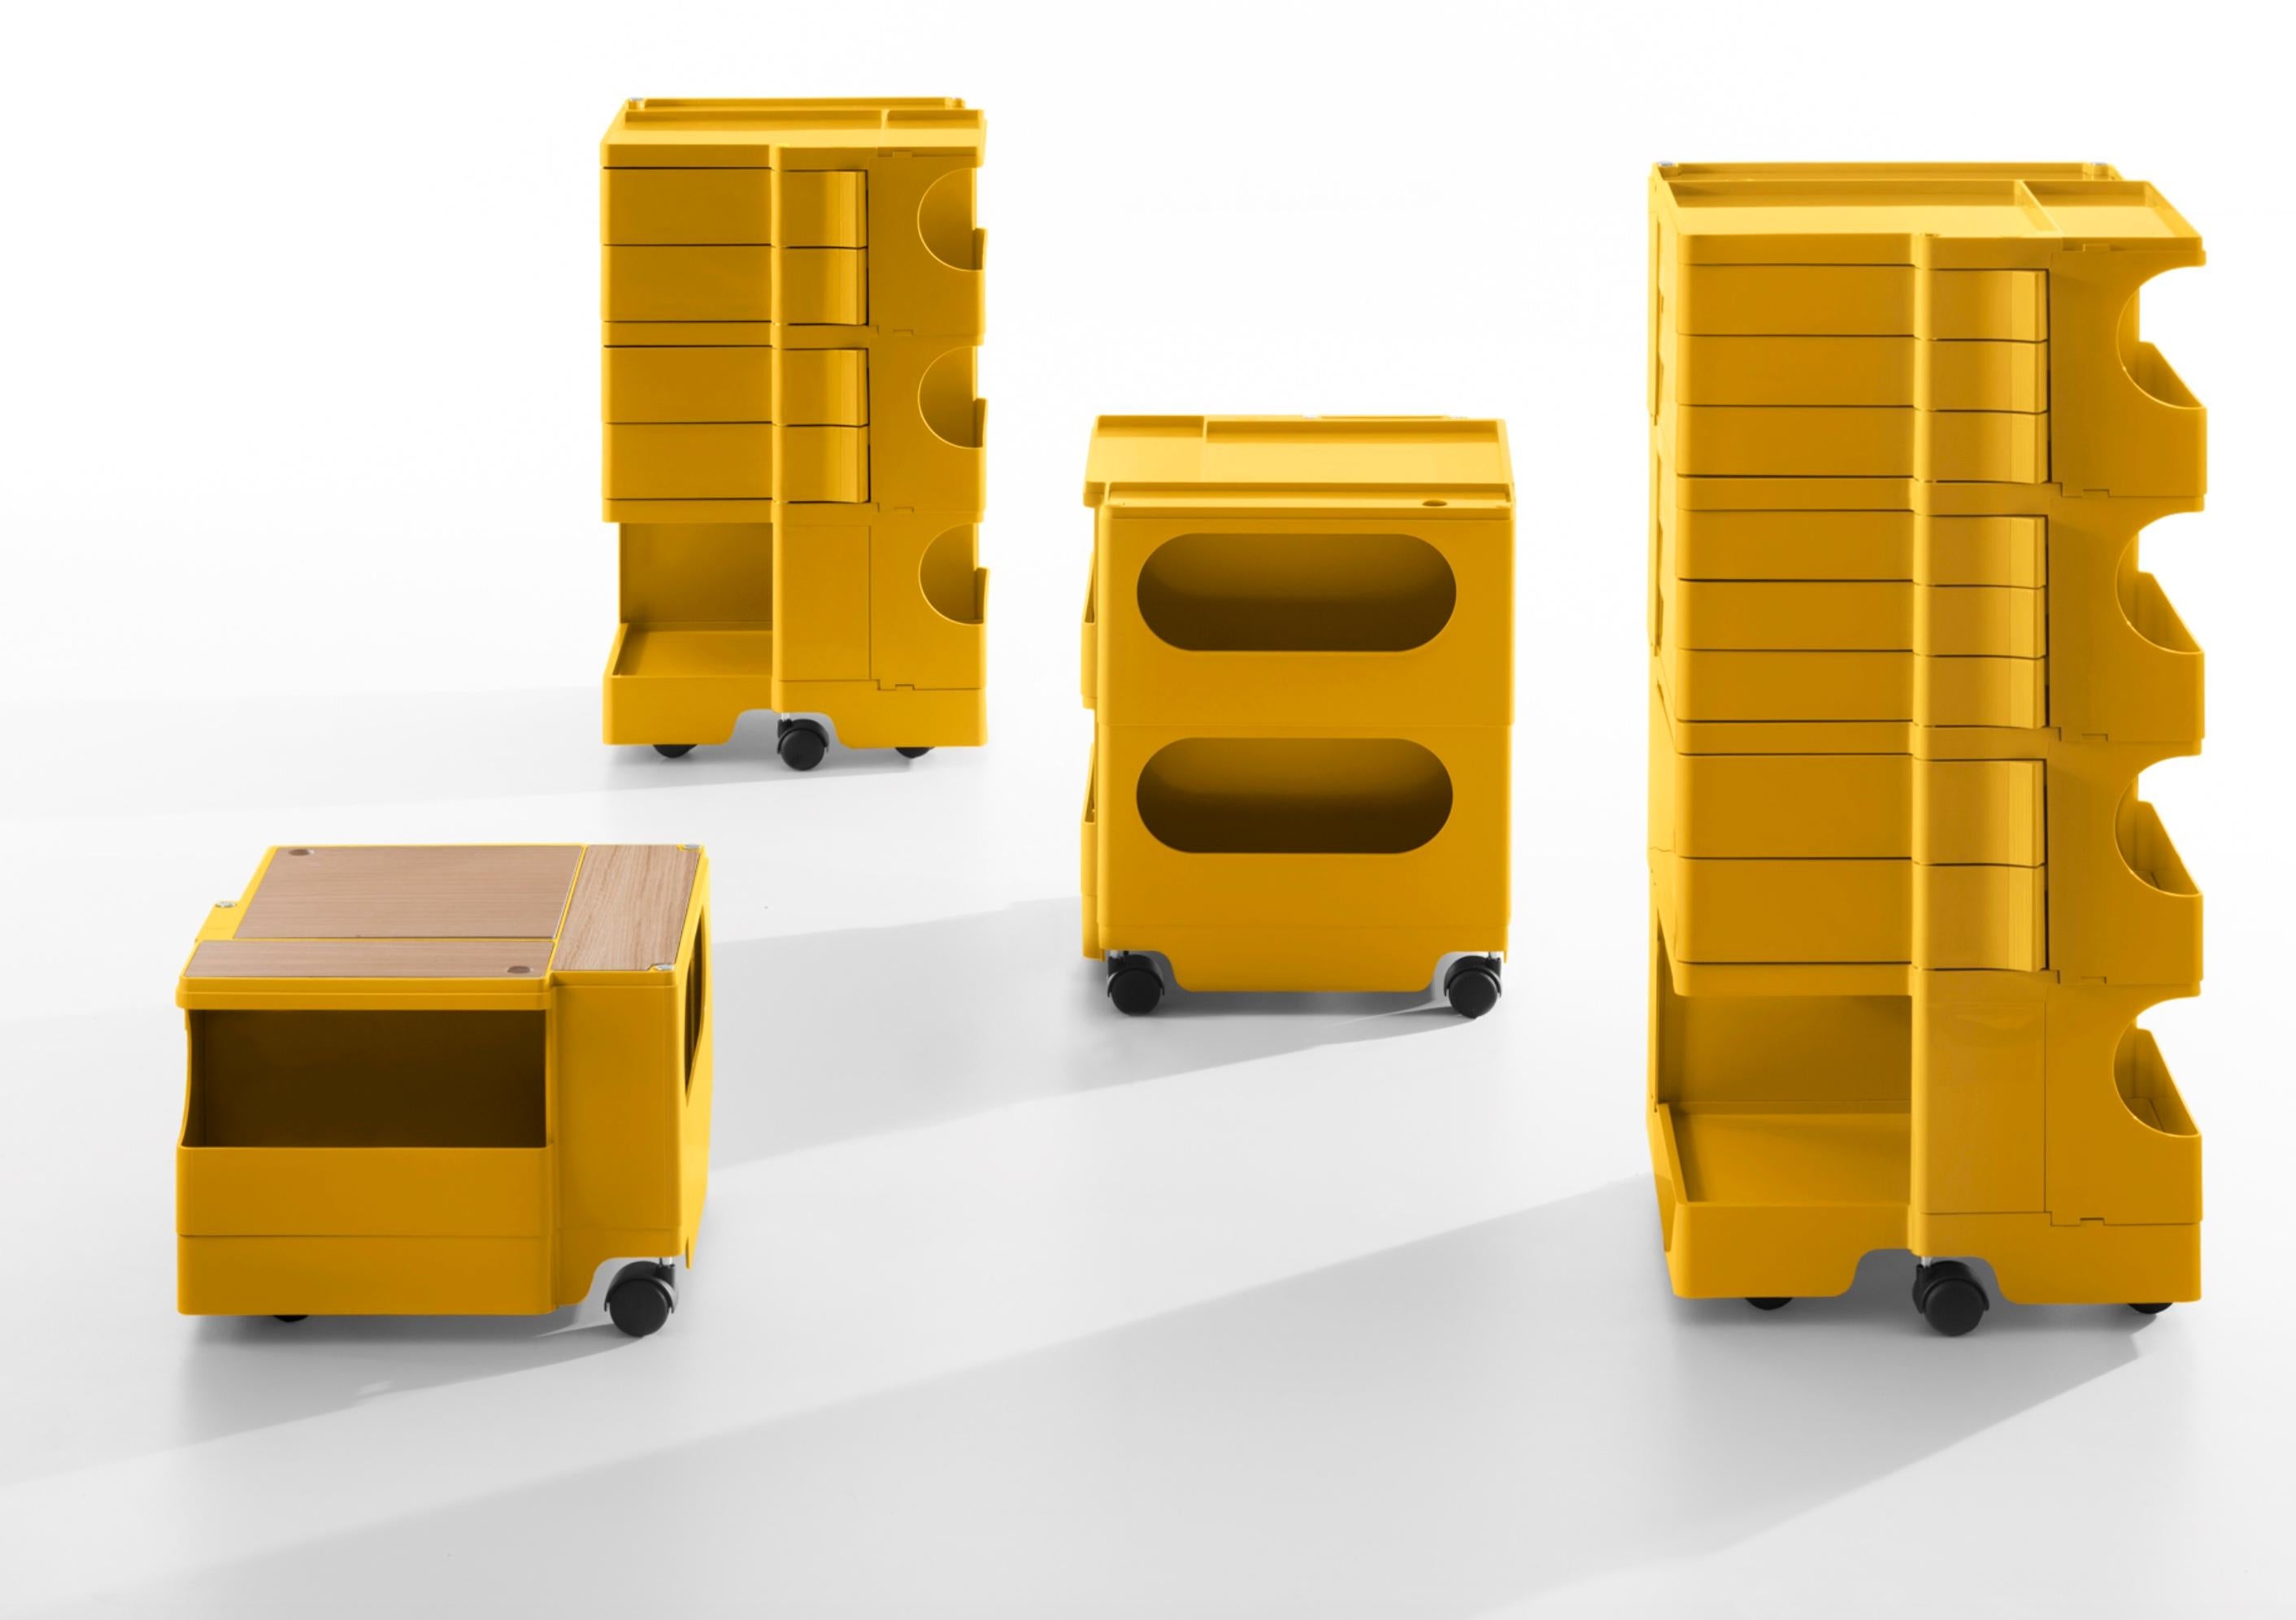 Joe Colombo 'Boby' Trolley for B-Line. Designed in 1970, current production. Part of the permanent collection of MoMA in New York and the “Triennale” in Milan, Smau Prize in 1971. 

Boby is much more than a simple container: it made design history.